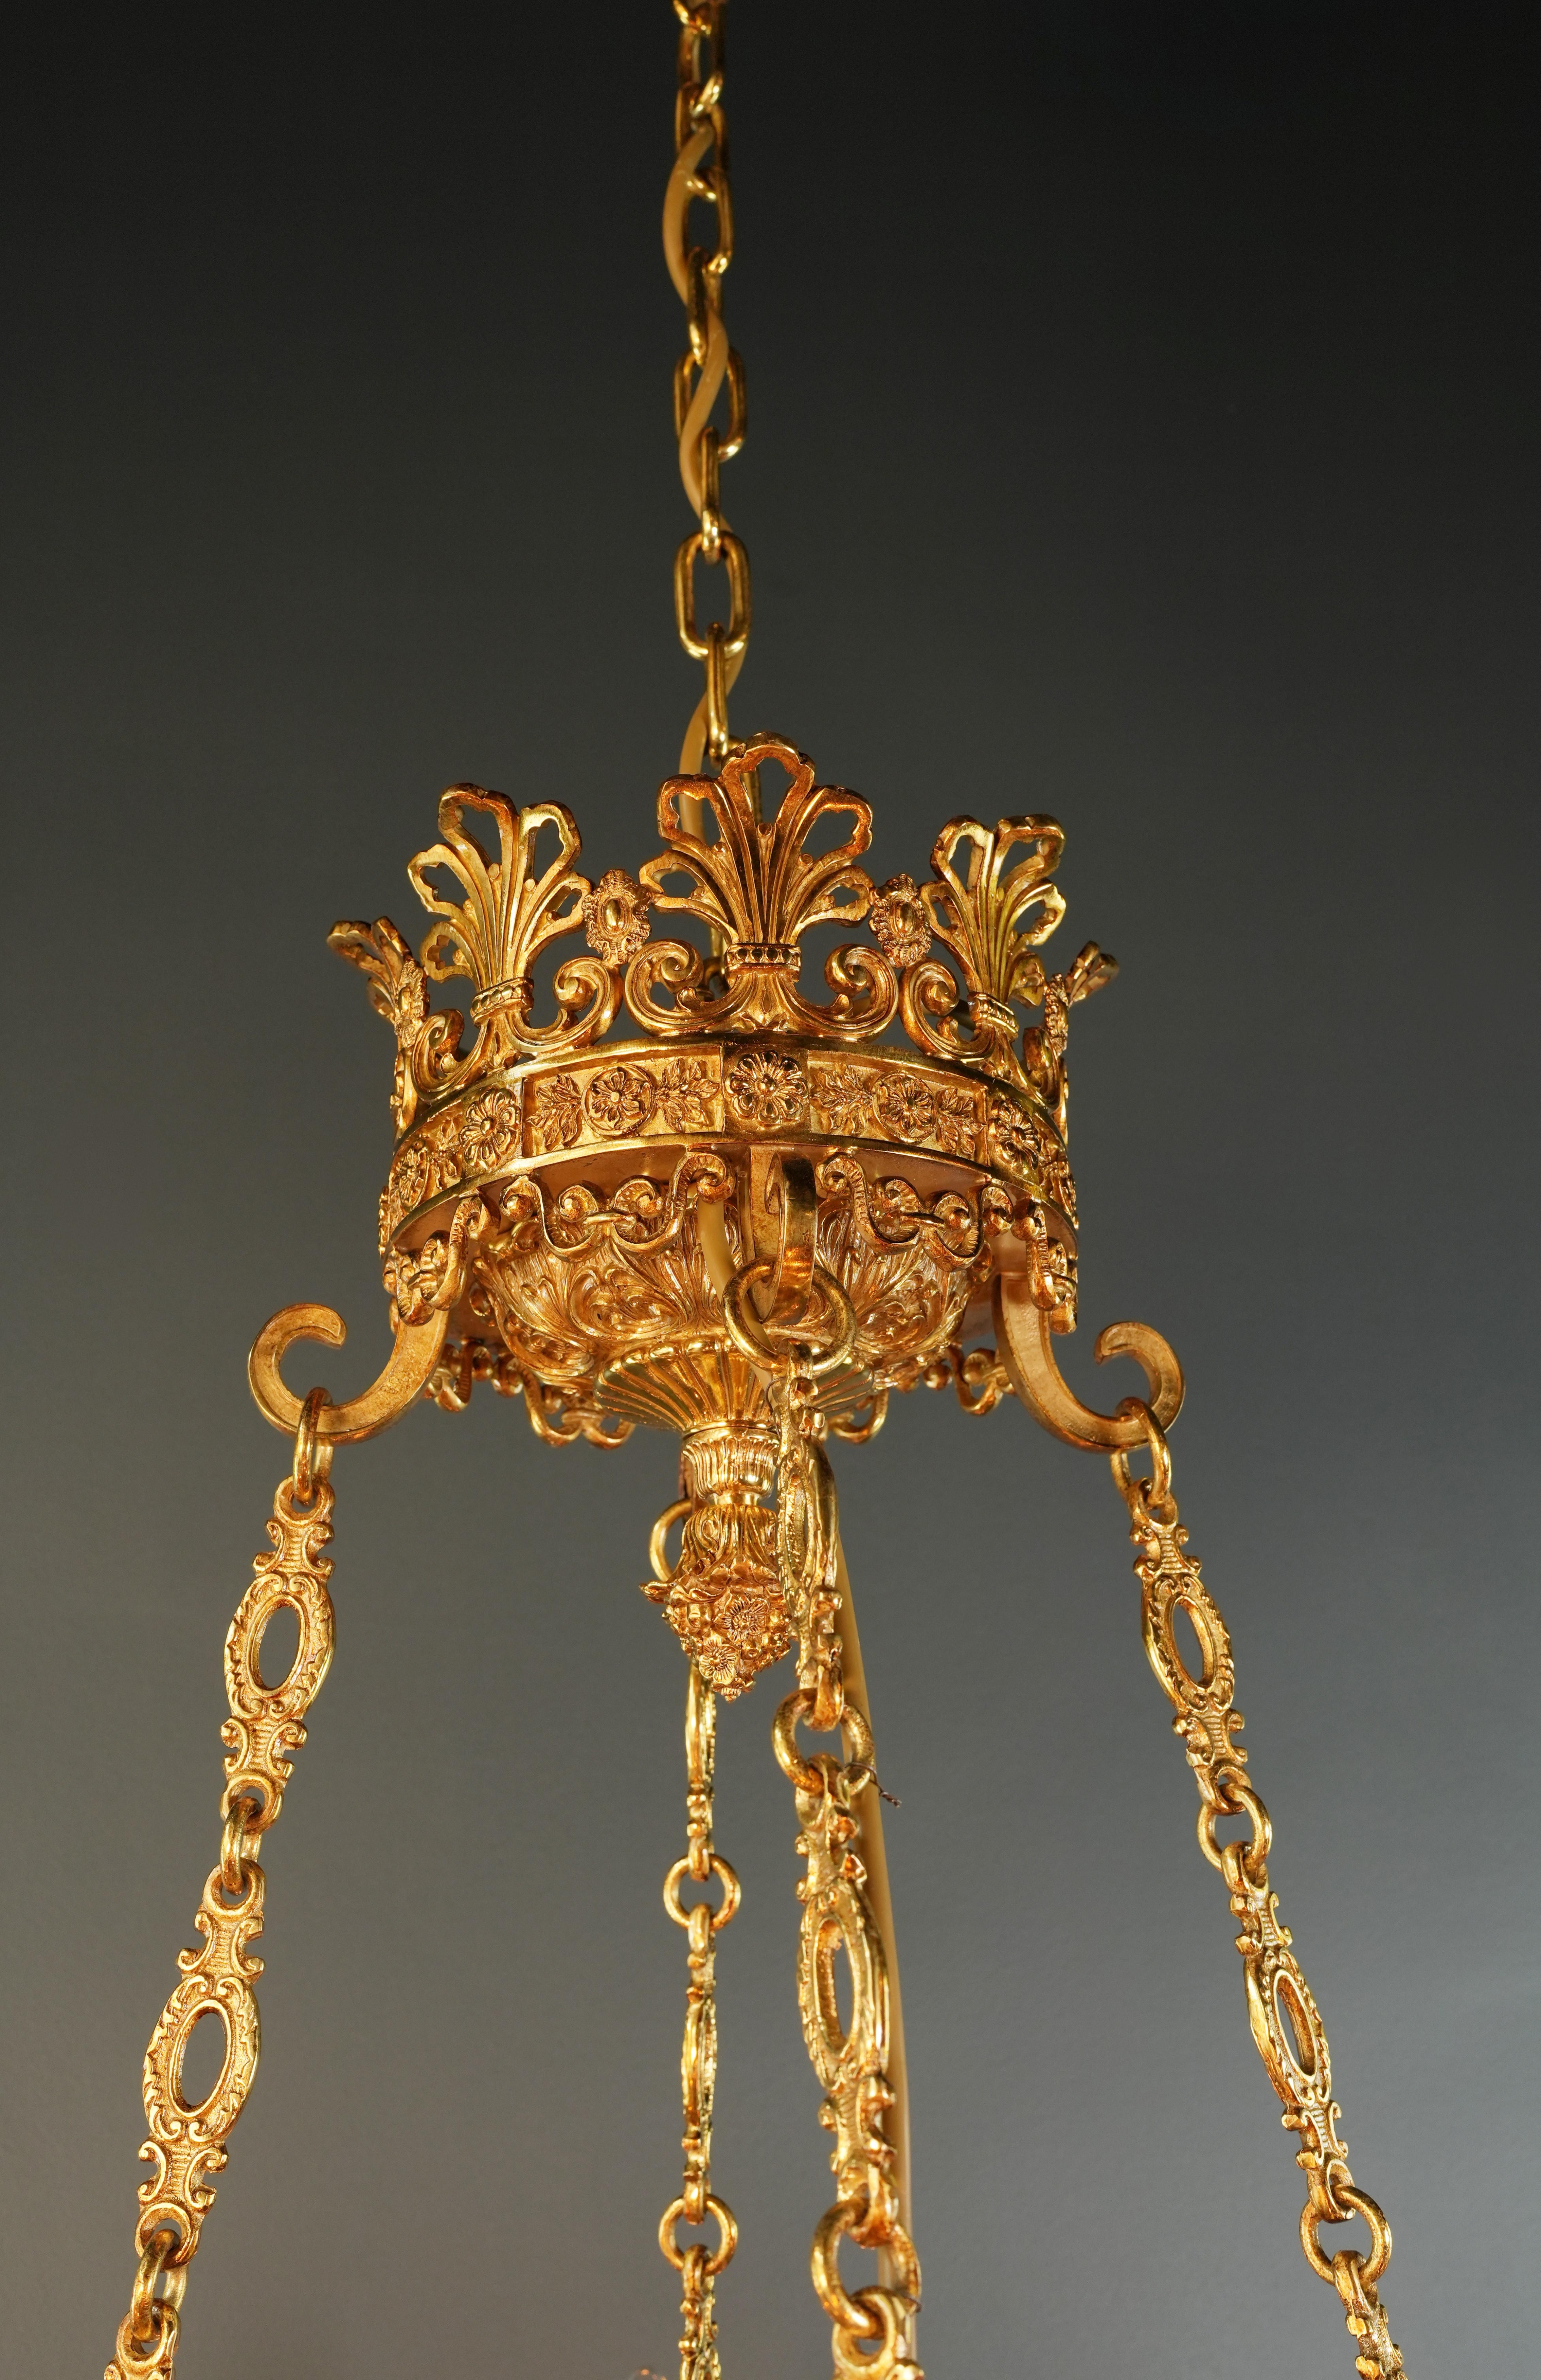 21st Century Baroque Brass Empire Chandelier Crystal Lustre Lamp Antique Gold  For Sale 8